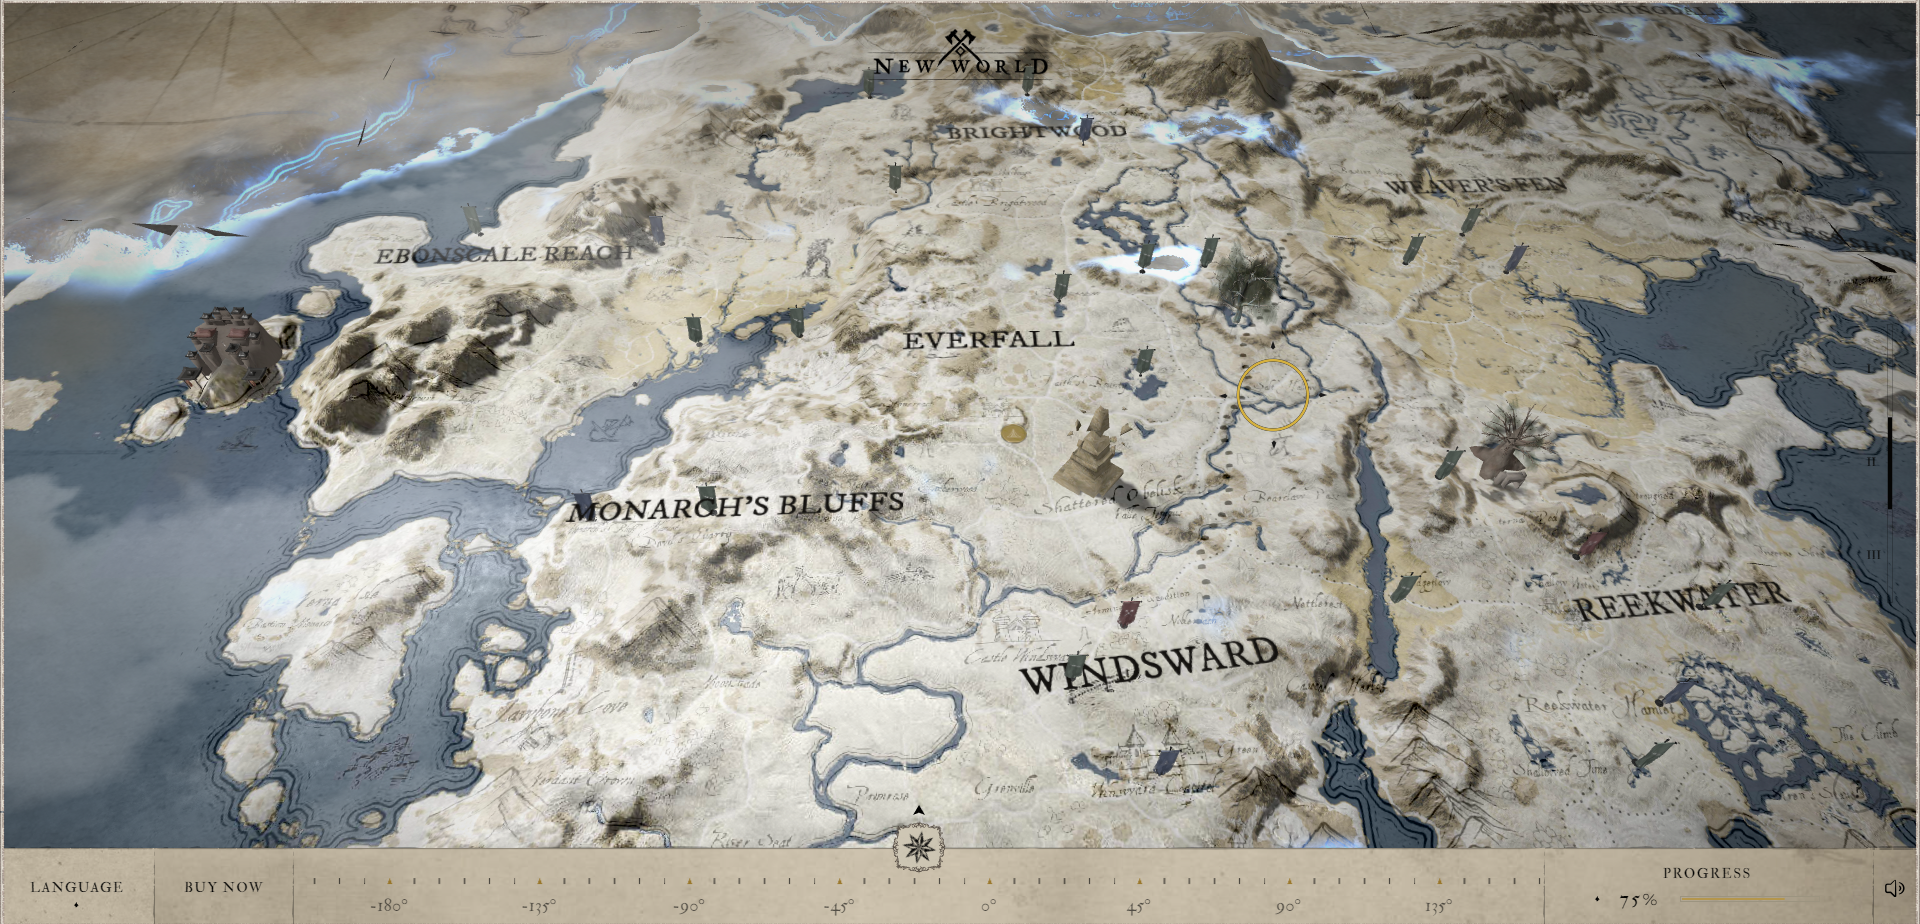 Project New World Map Wiki Guide [December 2023] - MrGuider